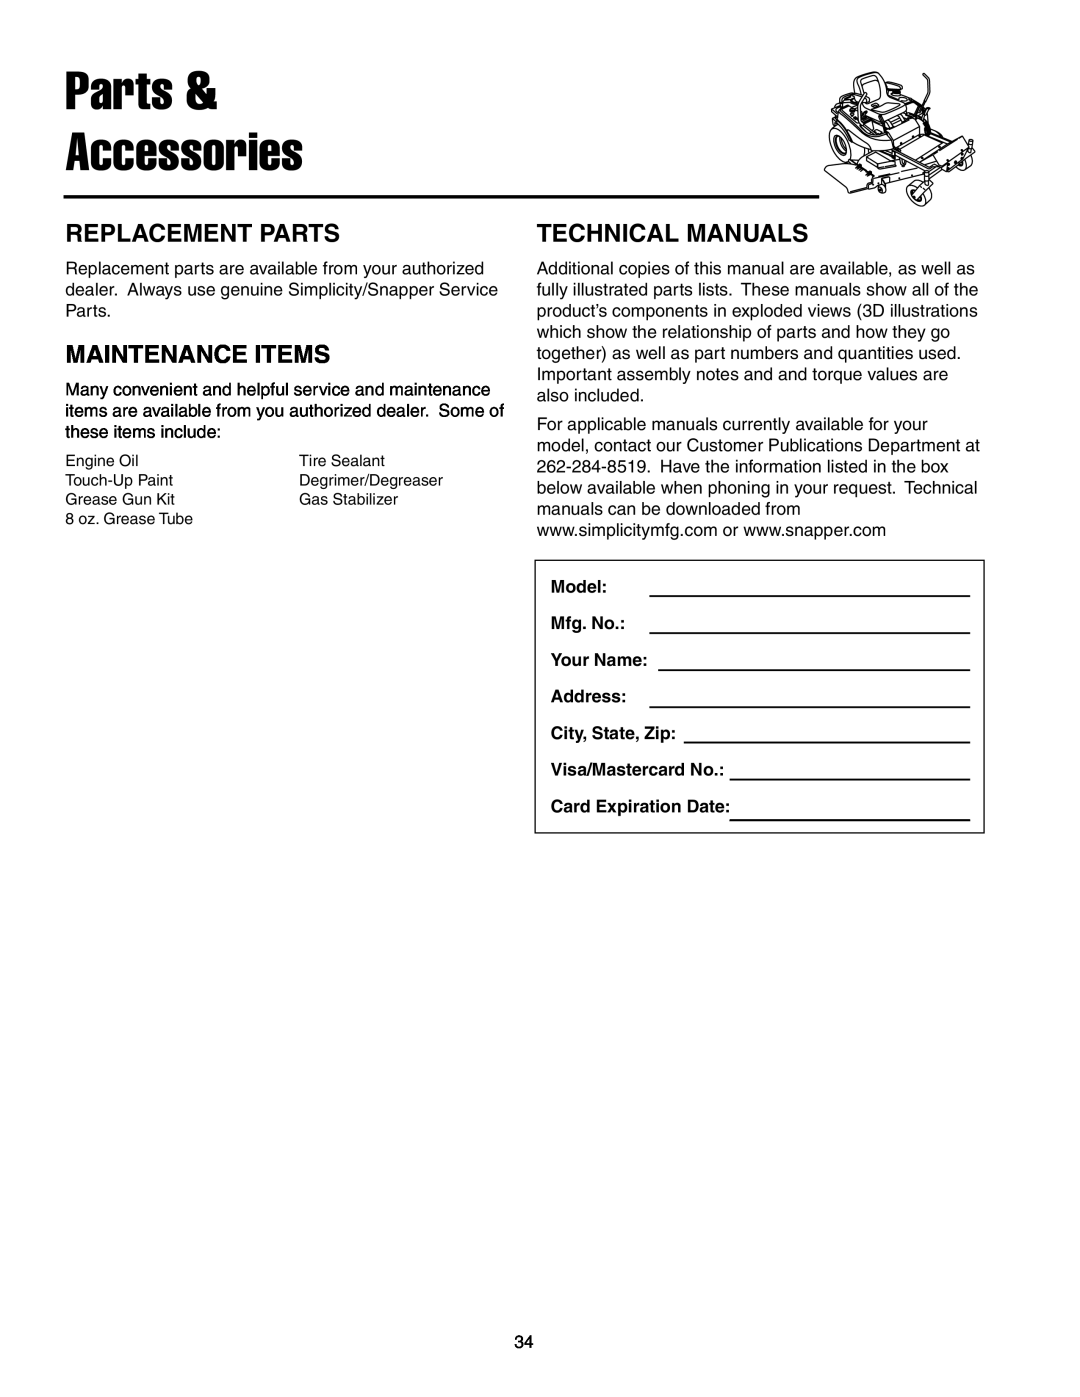 Simplicity 7800071 Replacement Parts, Maintenance Items, Technical Manuals, Parts & Accessories, Card Expiration Date 